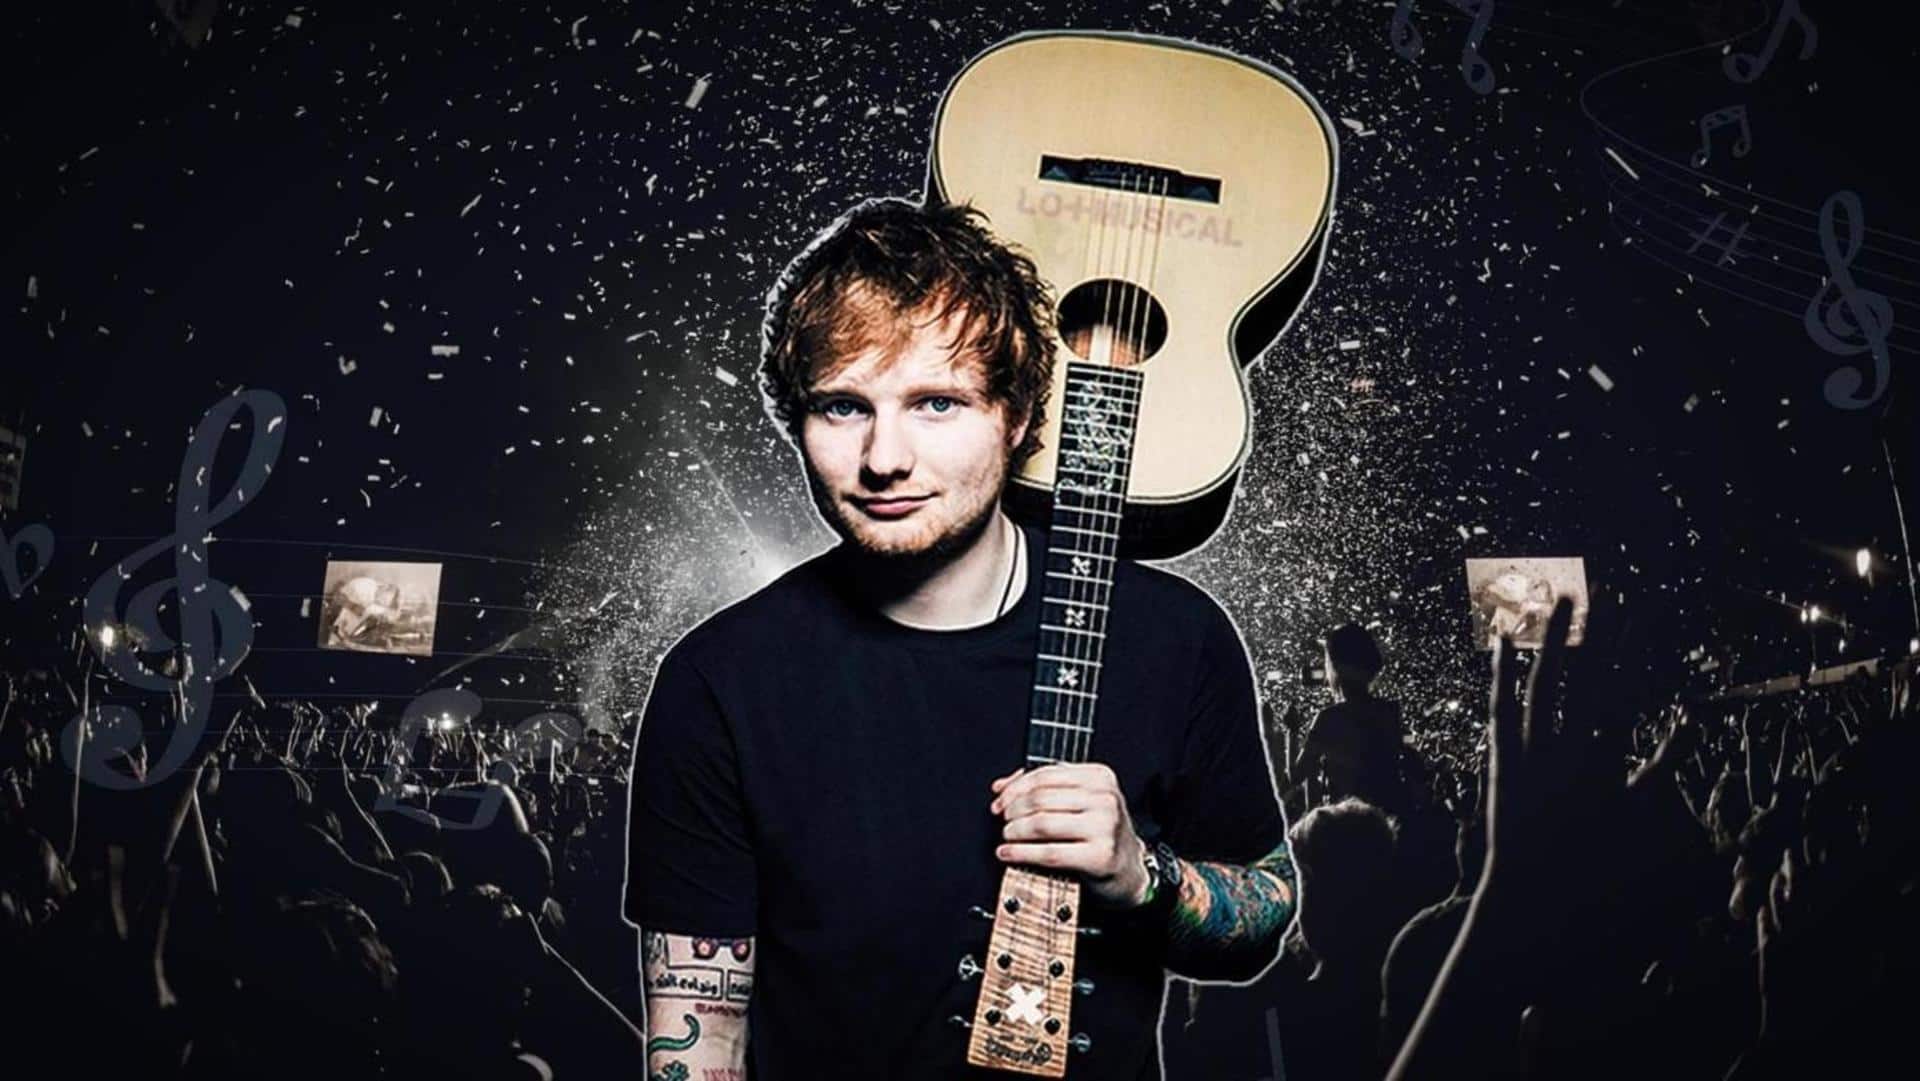 On Ed Sheeran's birthday, listen to his best collaborations